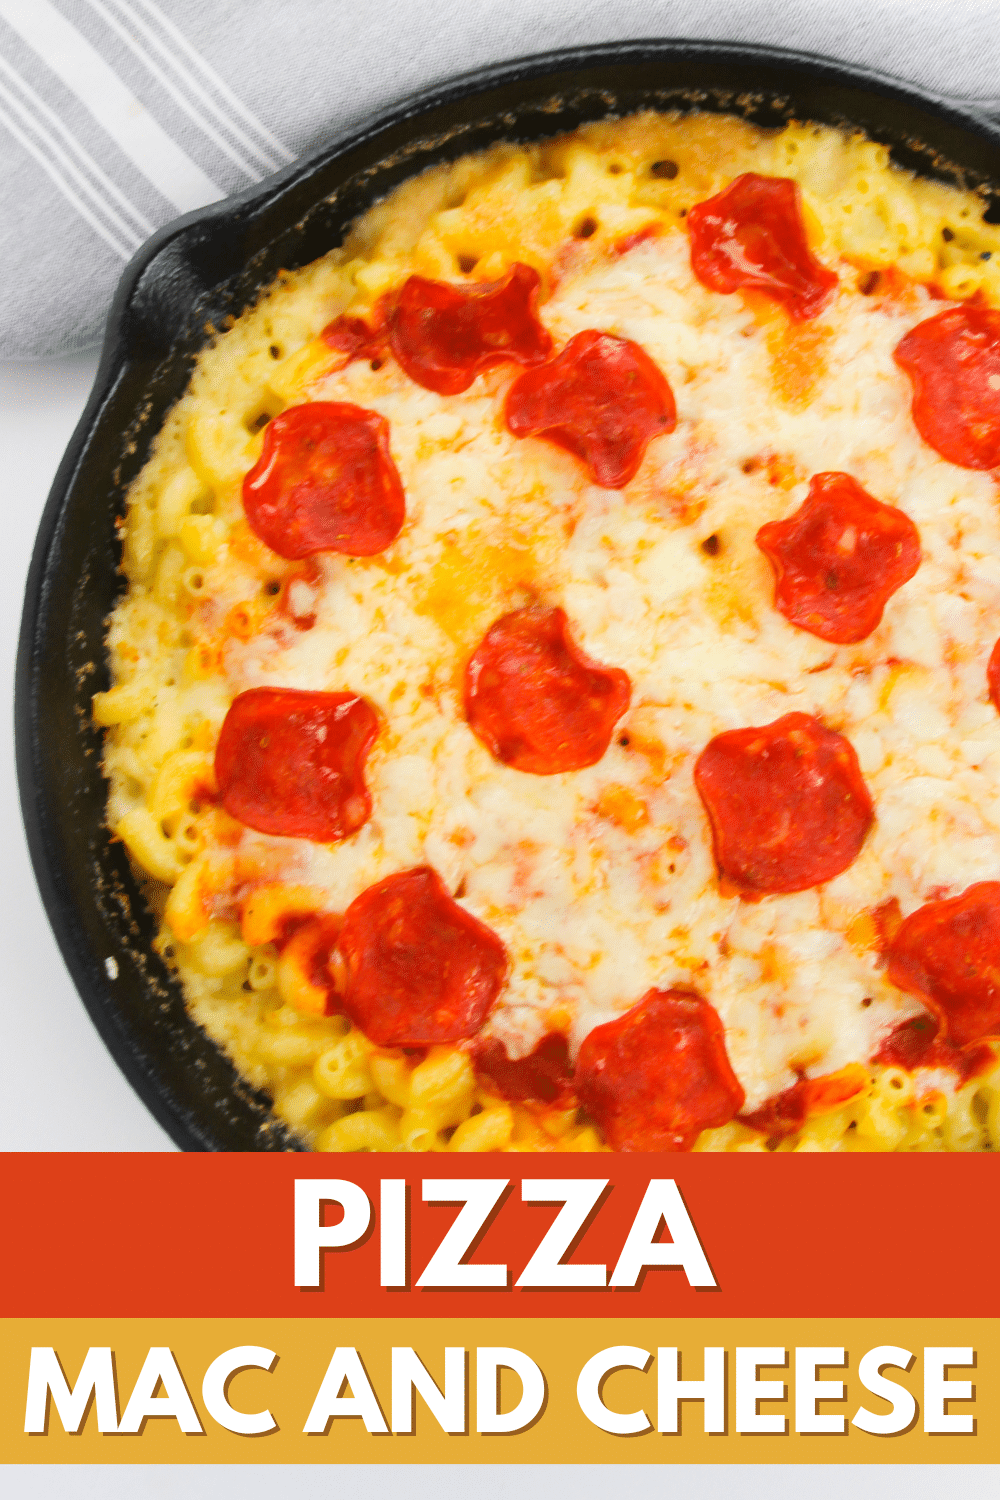 Pizza mac and cheese skillet.